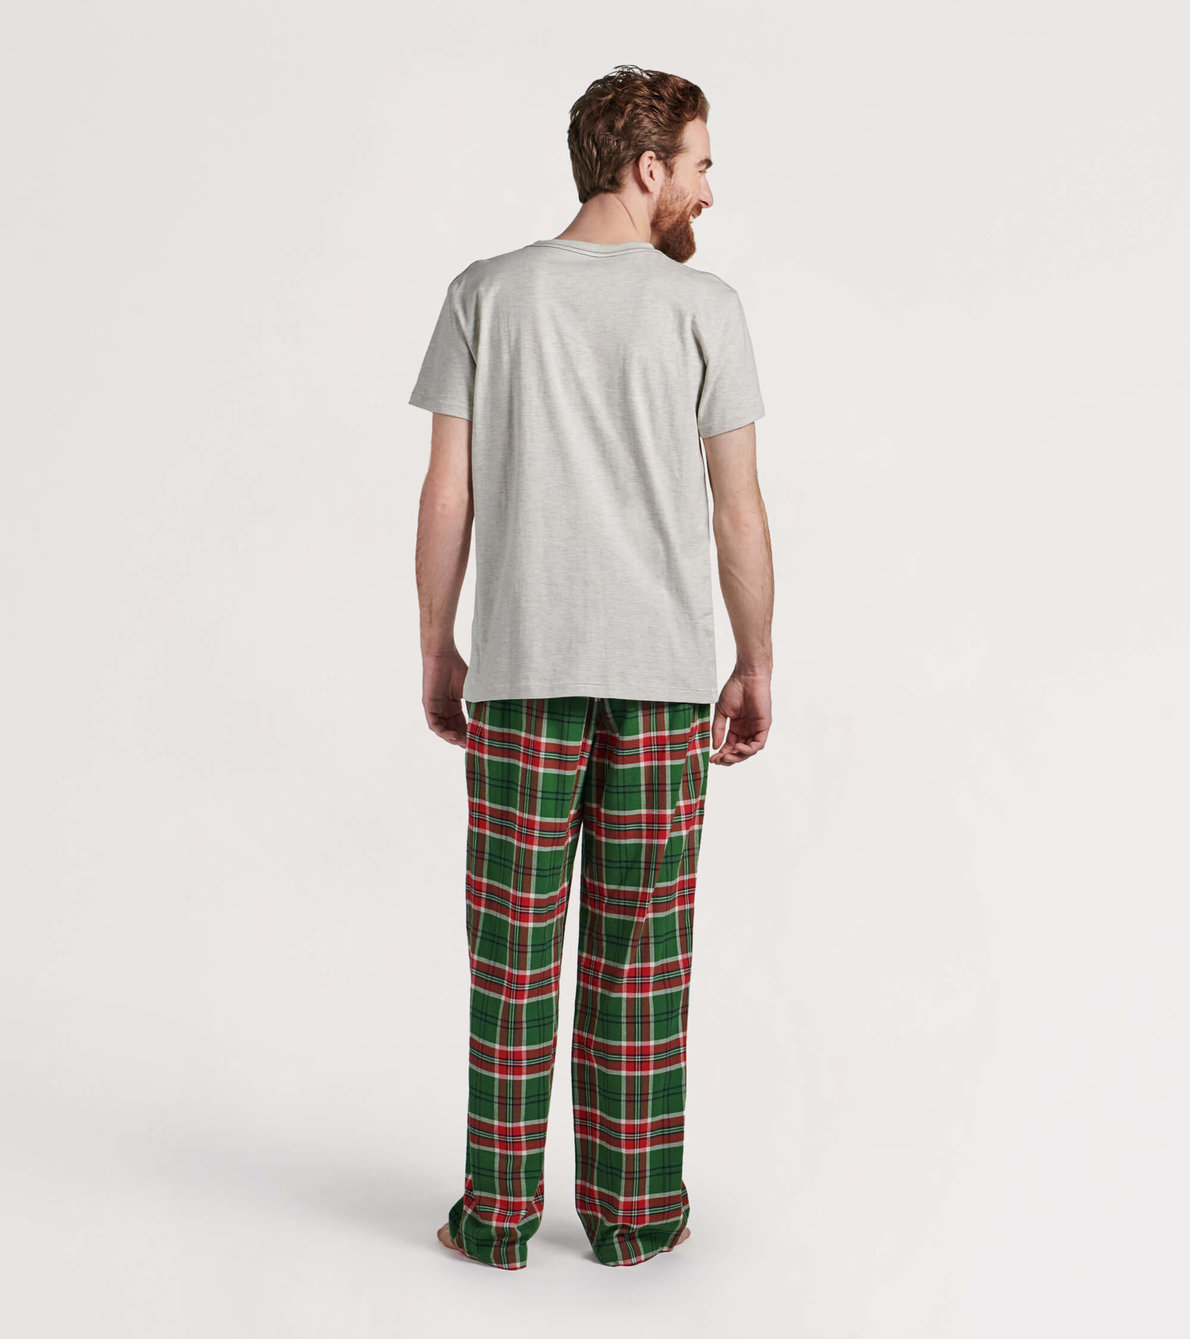 View larger image of Country Christmas Plaid Men's Flannel Pajama Pants